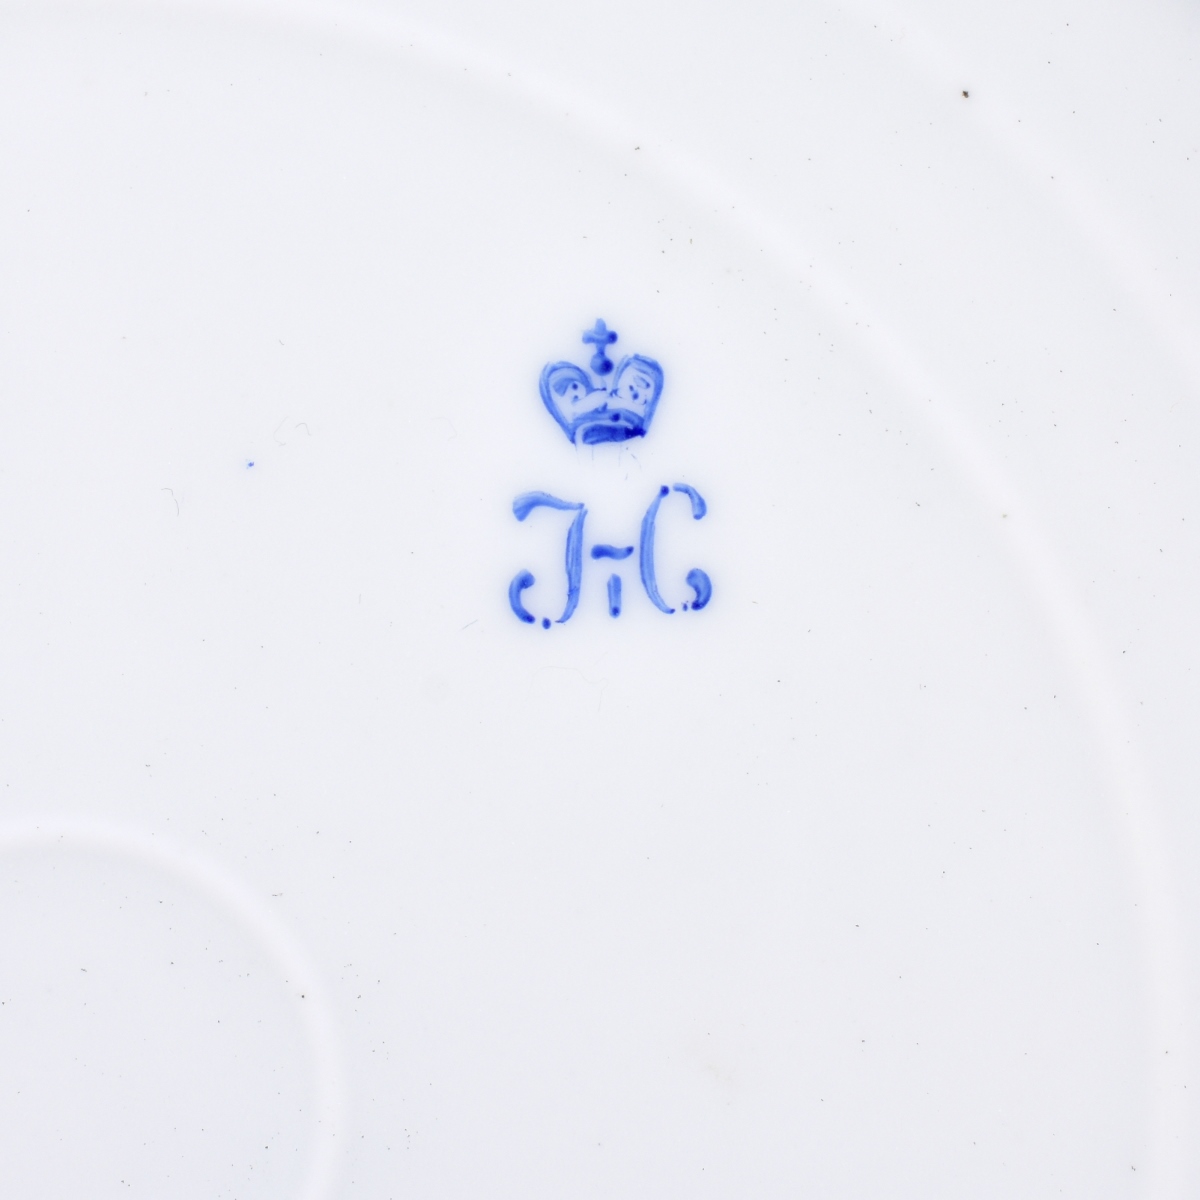 A Russian Imperial Porcelain Factory Plate